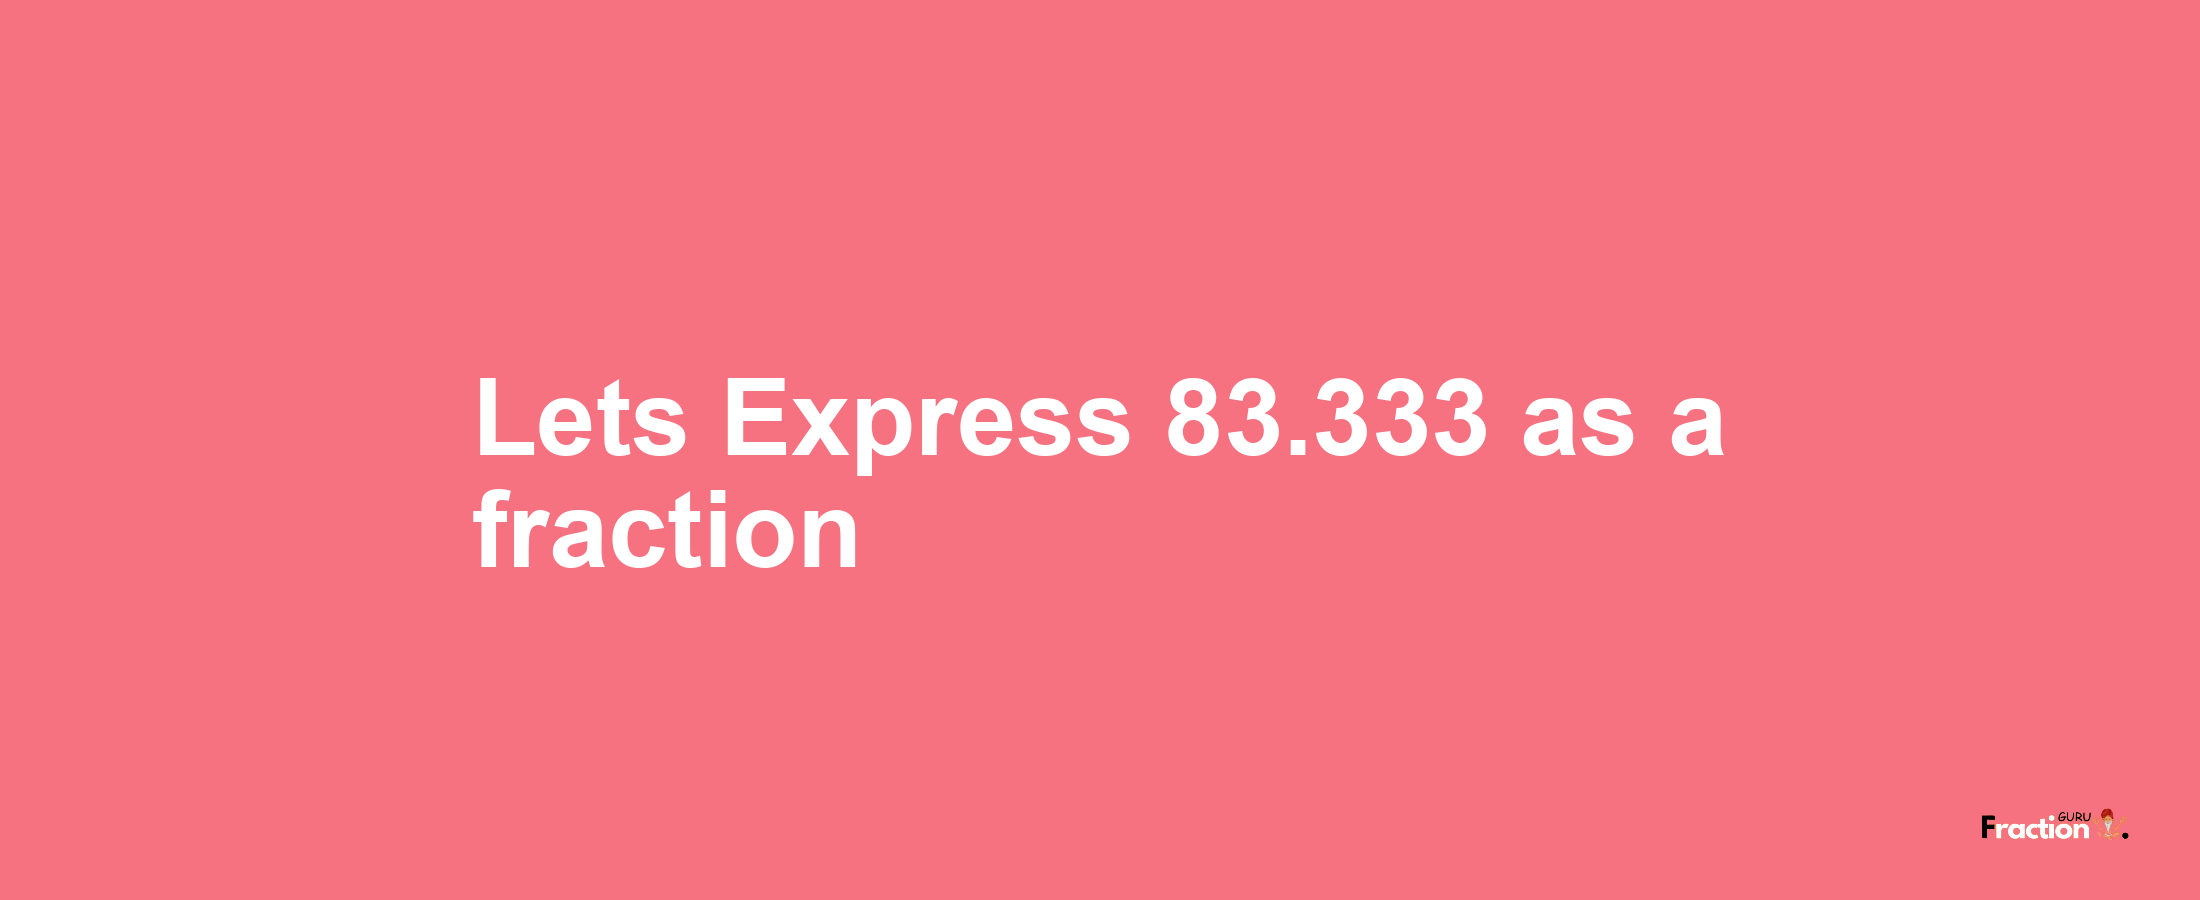 Lets Express 83.333 as afraction